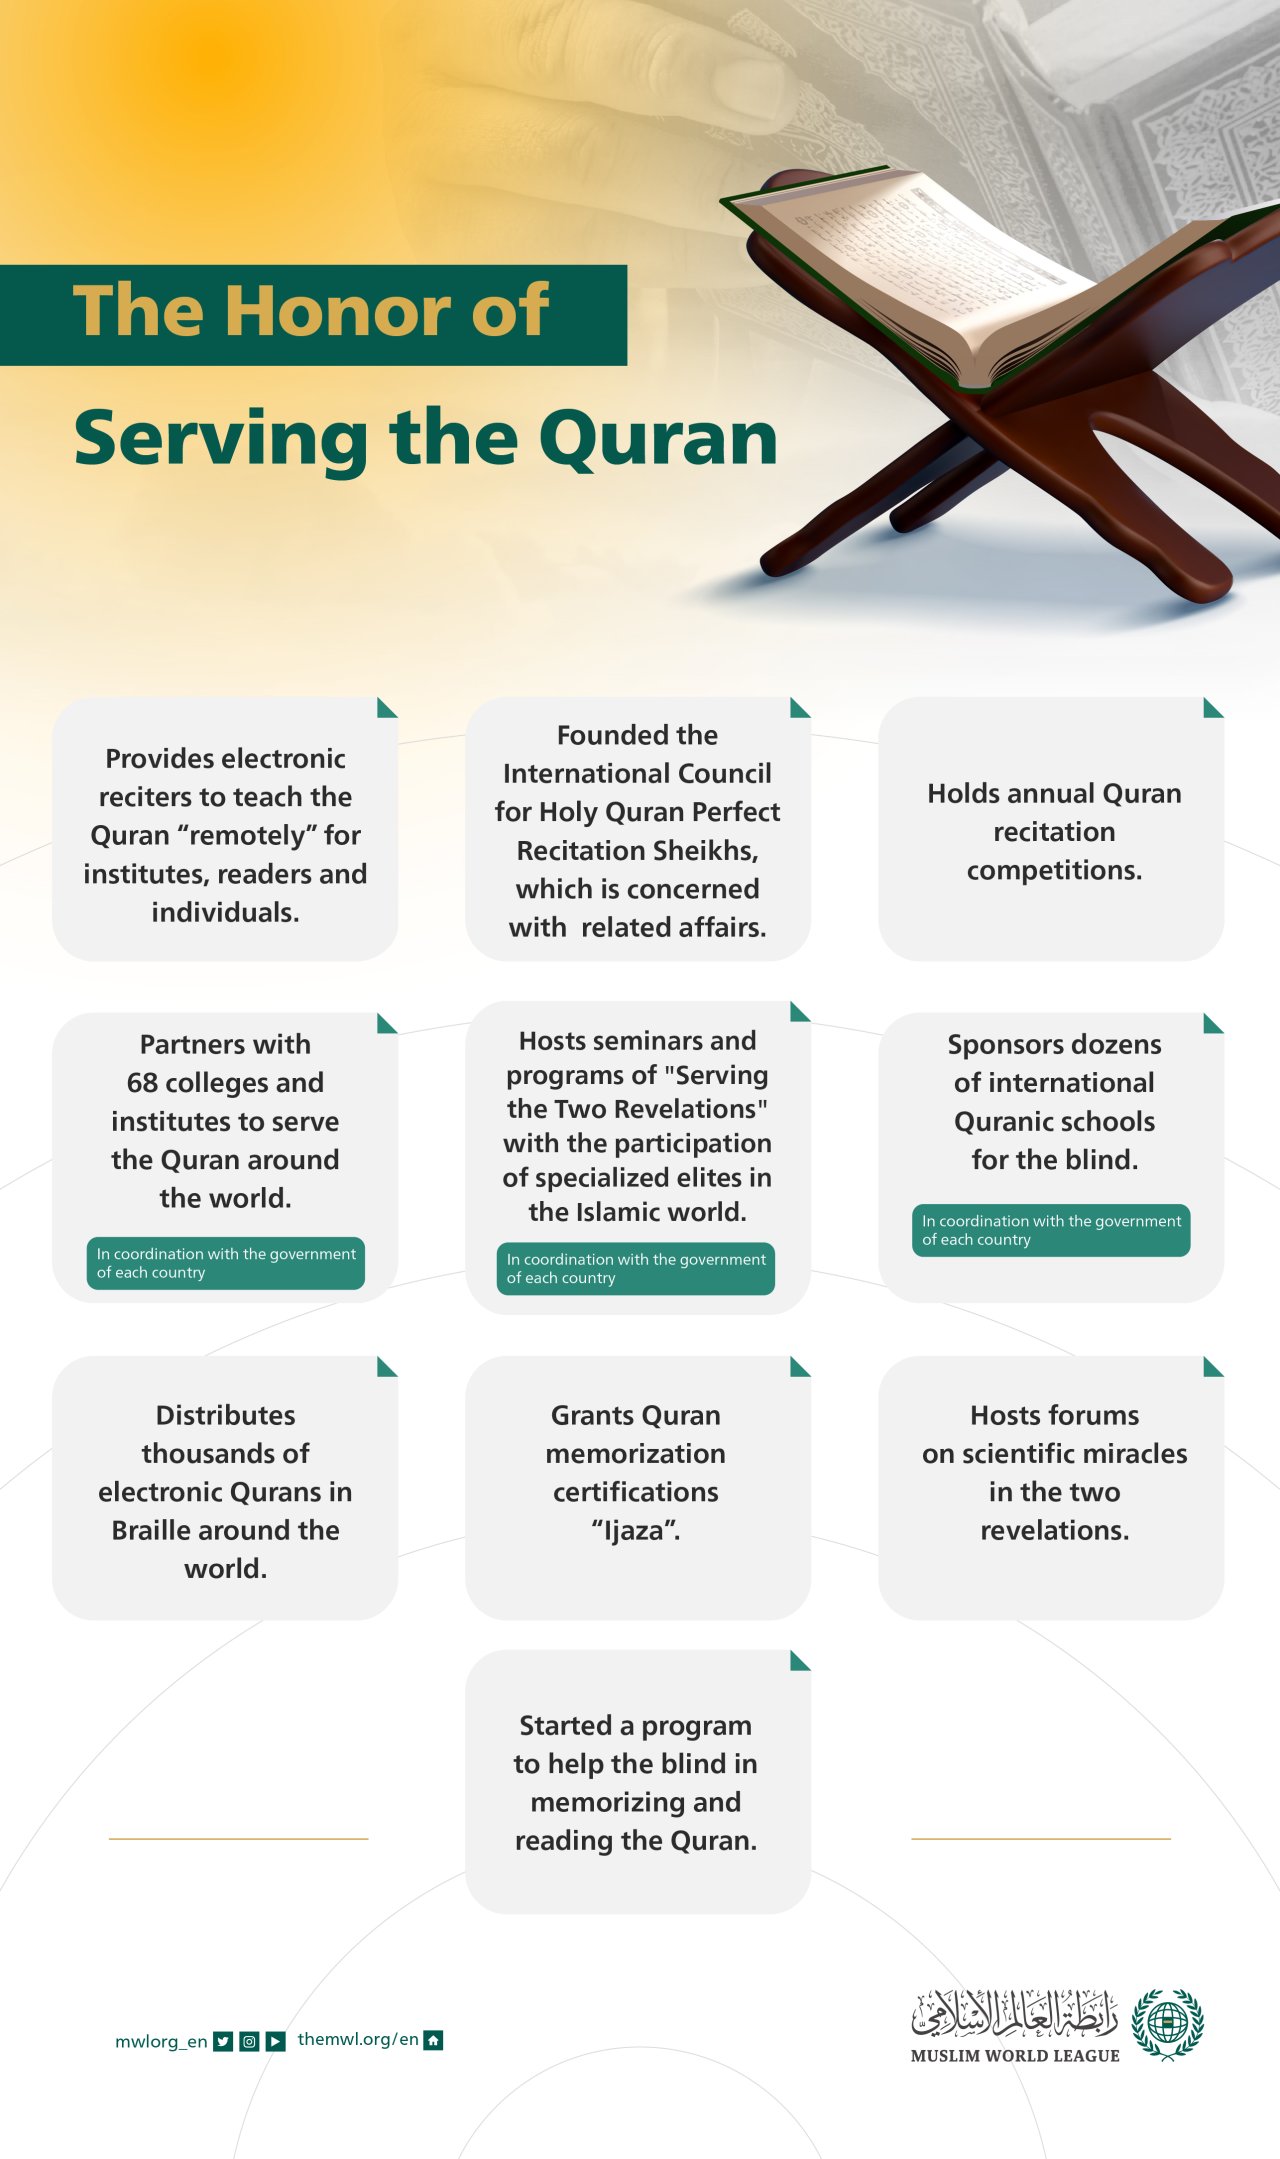 The honor of serving the Holy Quran